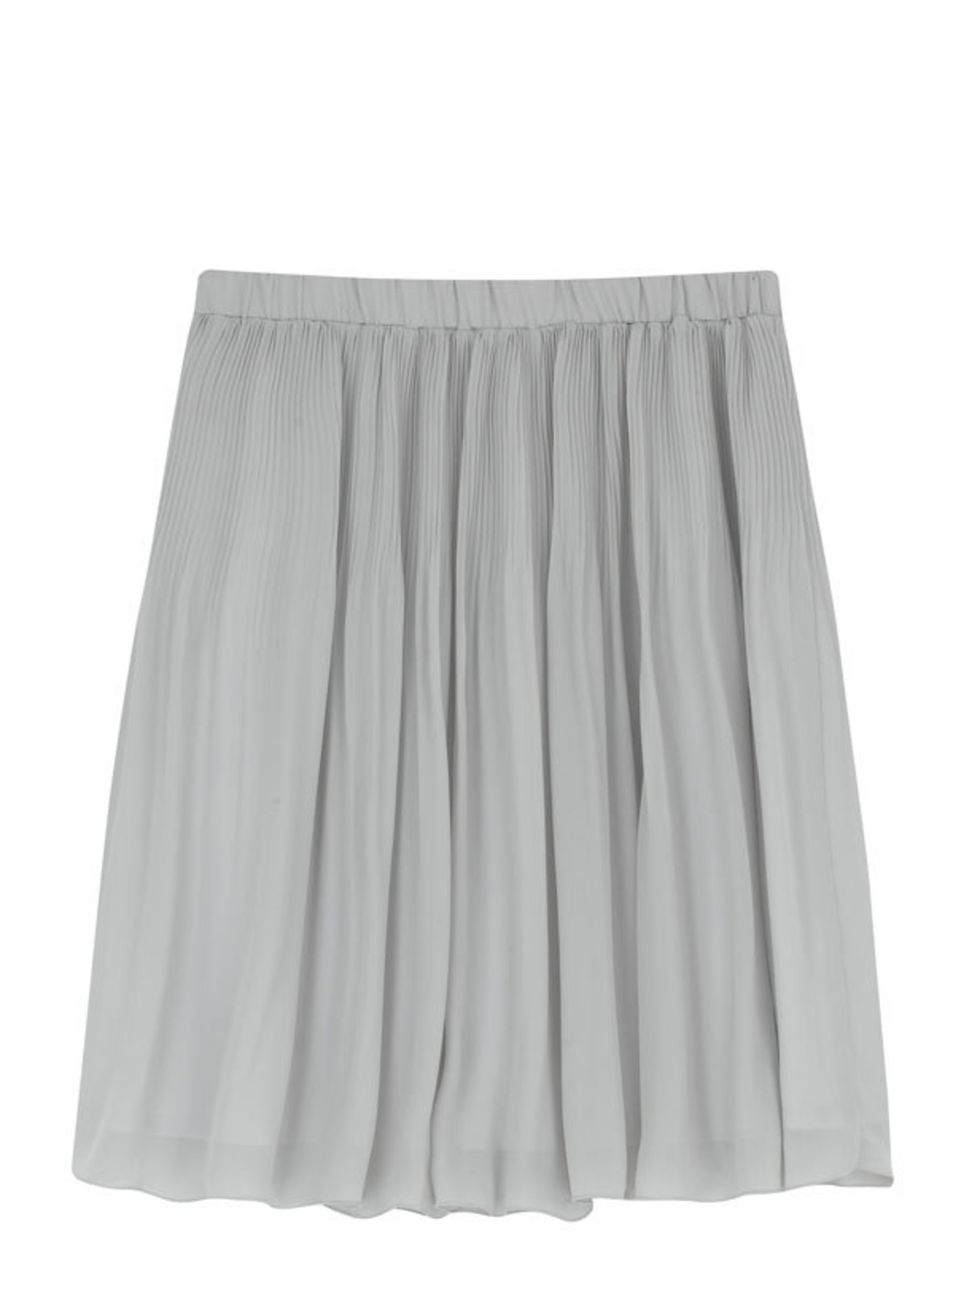 <p>This is the season of the skirt and short, pleated styles are a mini trend set to continue next summer. Get this versatile grey one now and wear for a year to come <a href="http://shop.uniqlo.com/uk/list/basic/women/bottoms/skirts">Uniqlo</a> chiffon 